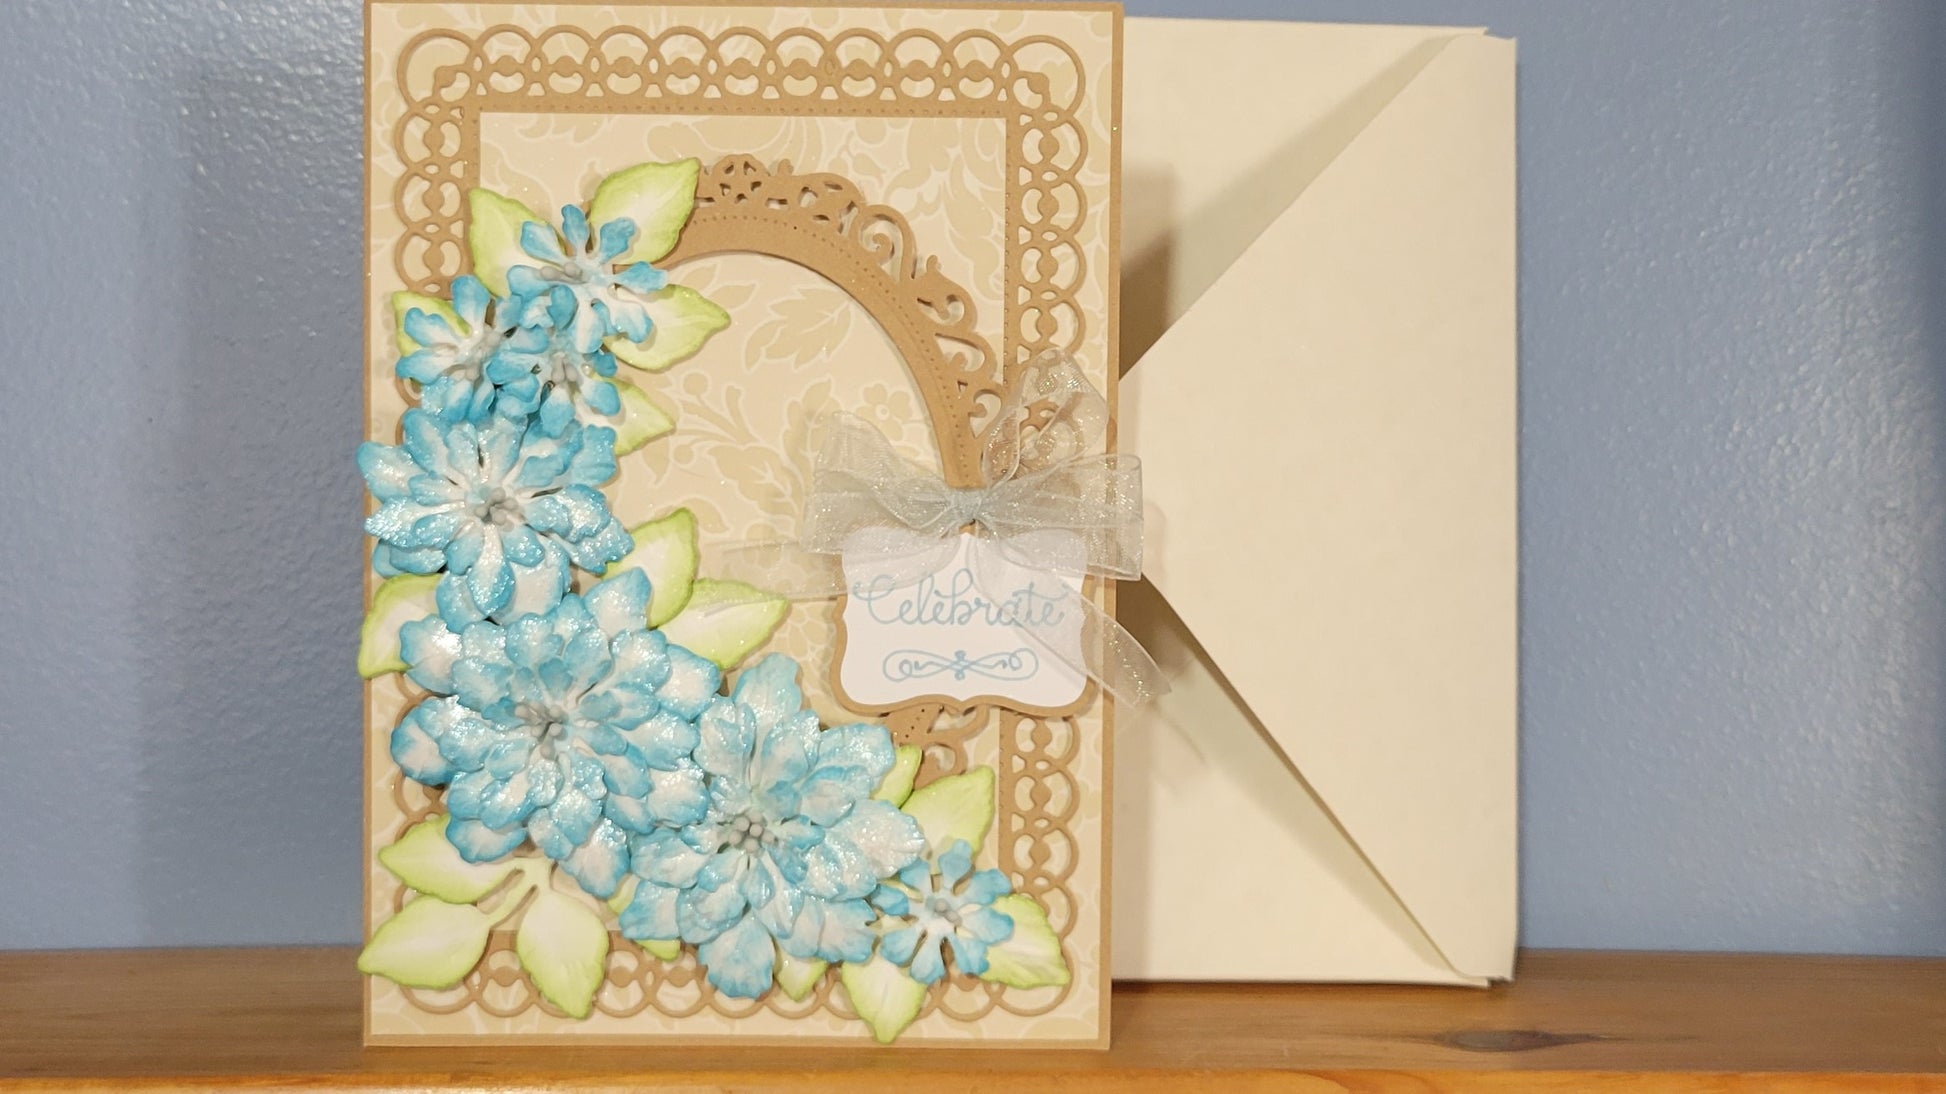 Celebrate card and envelope.